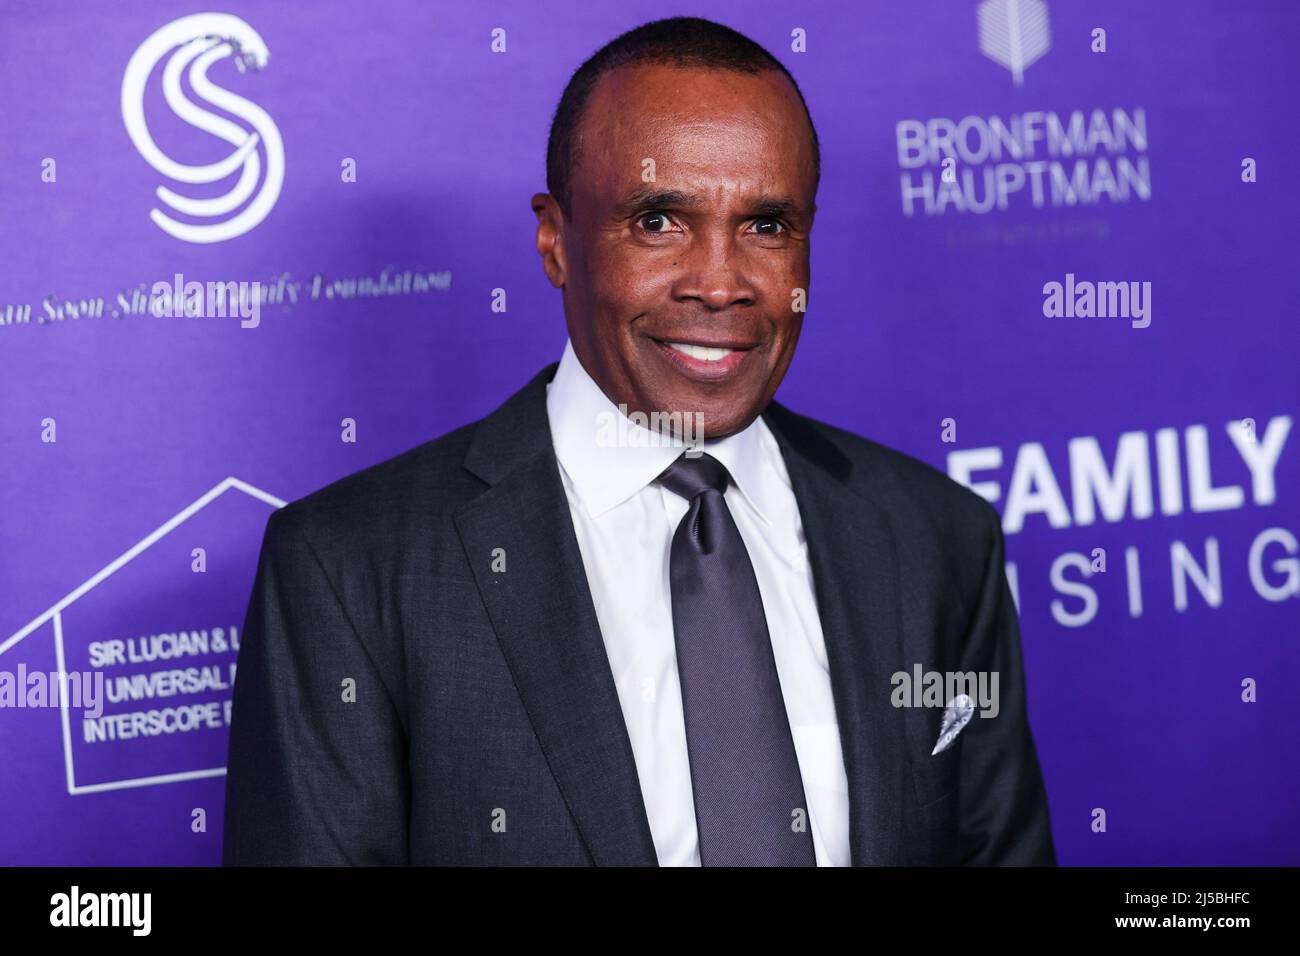 Hollywood, USA. 21st Apr, 2022. West Hollywood, United States. 21st Apr, 2022. WEST HOLLYWOOD, LOS ANGELES, CALIFORNIA, USA - APRIL 21: American former professional boxer Sugar Ray Leonard arrives at the LA Family Housing (LAFH) Awards 2022 held at the Pacific Design Center on April 21, 2022 in West Hollywood, Los Angeles, California, United States. (Photo by Xavier Collin/Image Press Agency) Credit: Image Press Agency/Alamy Live News Credit: Image Press Agency/Alamy Live News Stock Photo